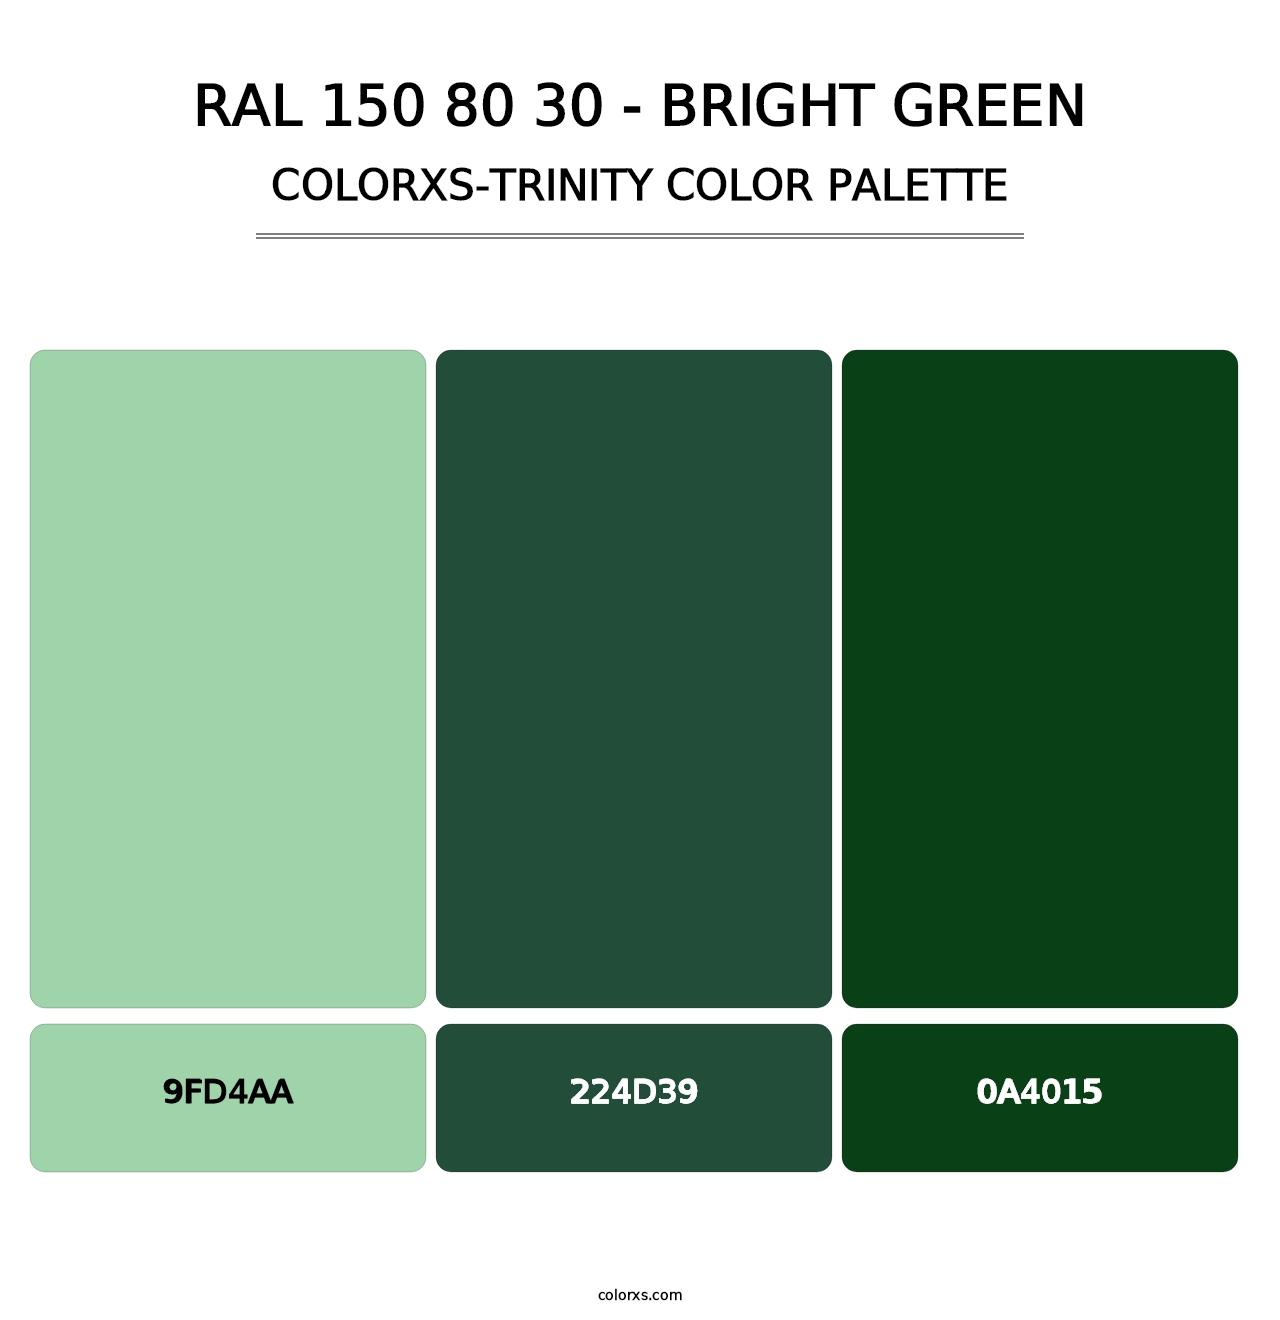 RAL 150 80 30 - Bright Green - Colorxs Trinity Palette